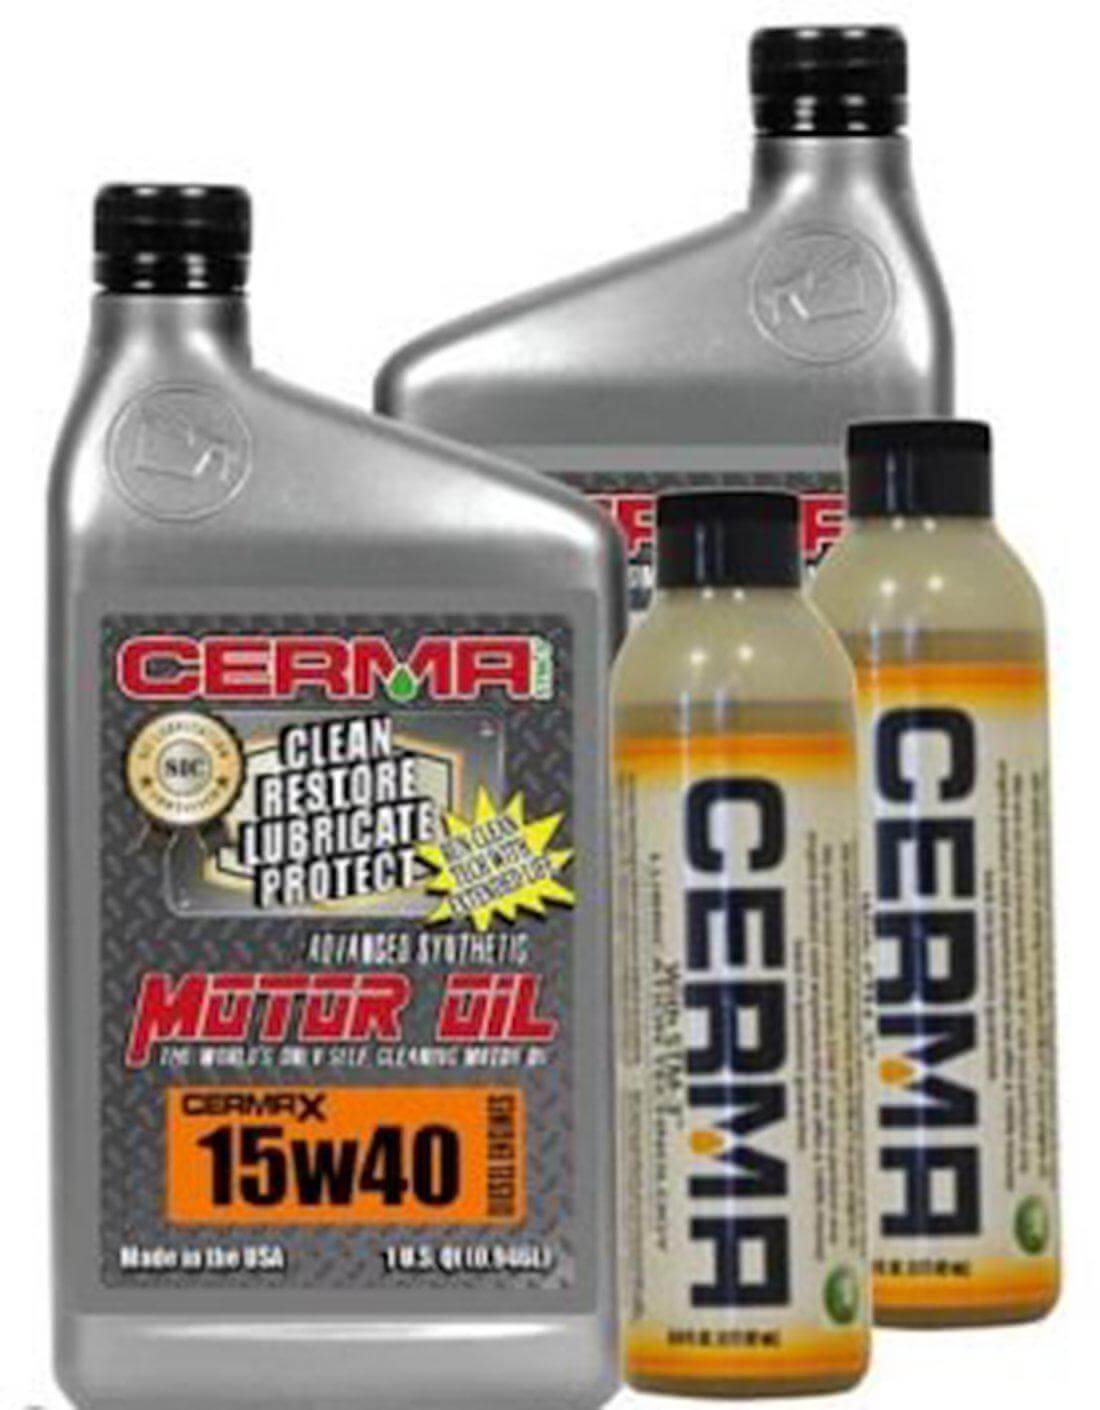 Cermax Diesel Ceramic Synthetic Oil Value Package for Semi Truck Engines at $805.41 only from cermatreatment.com